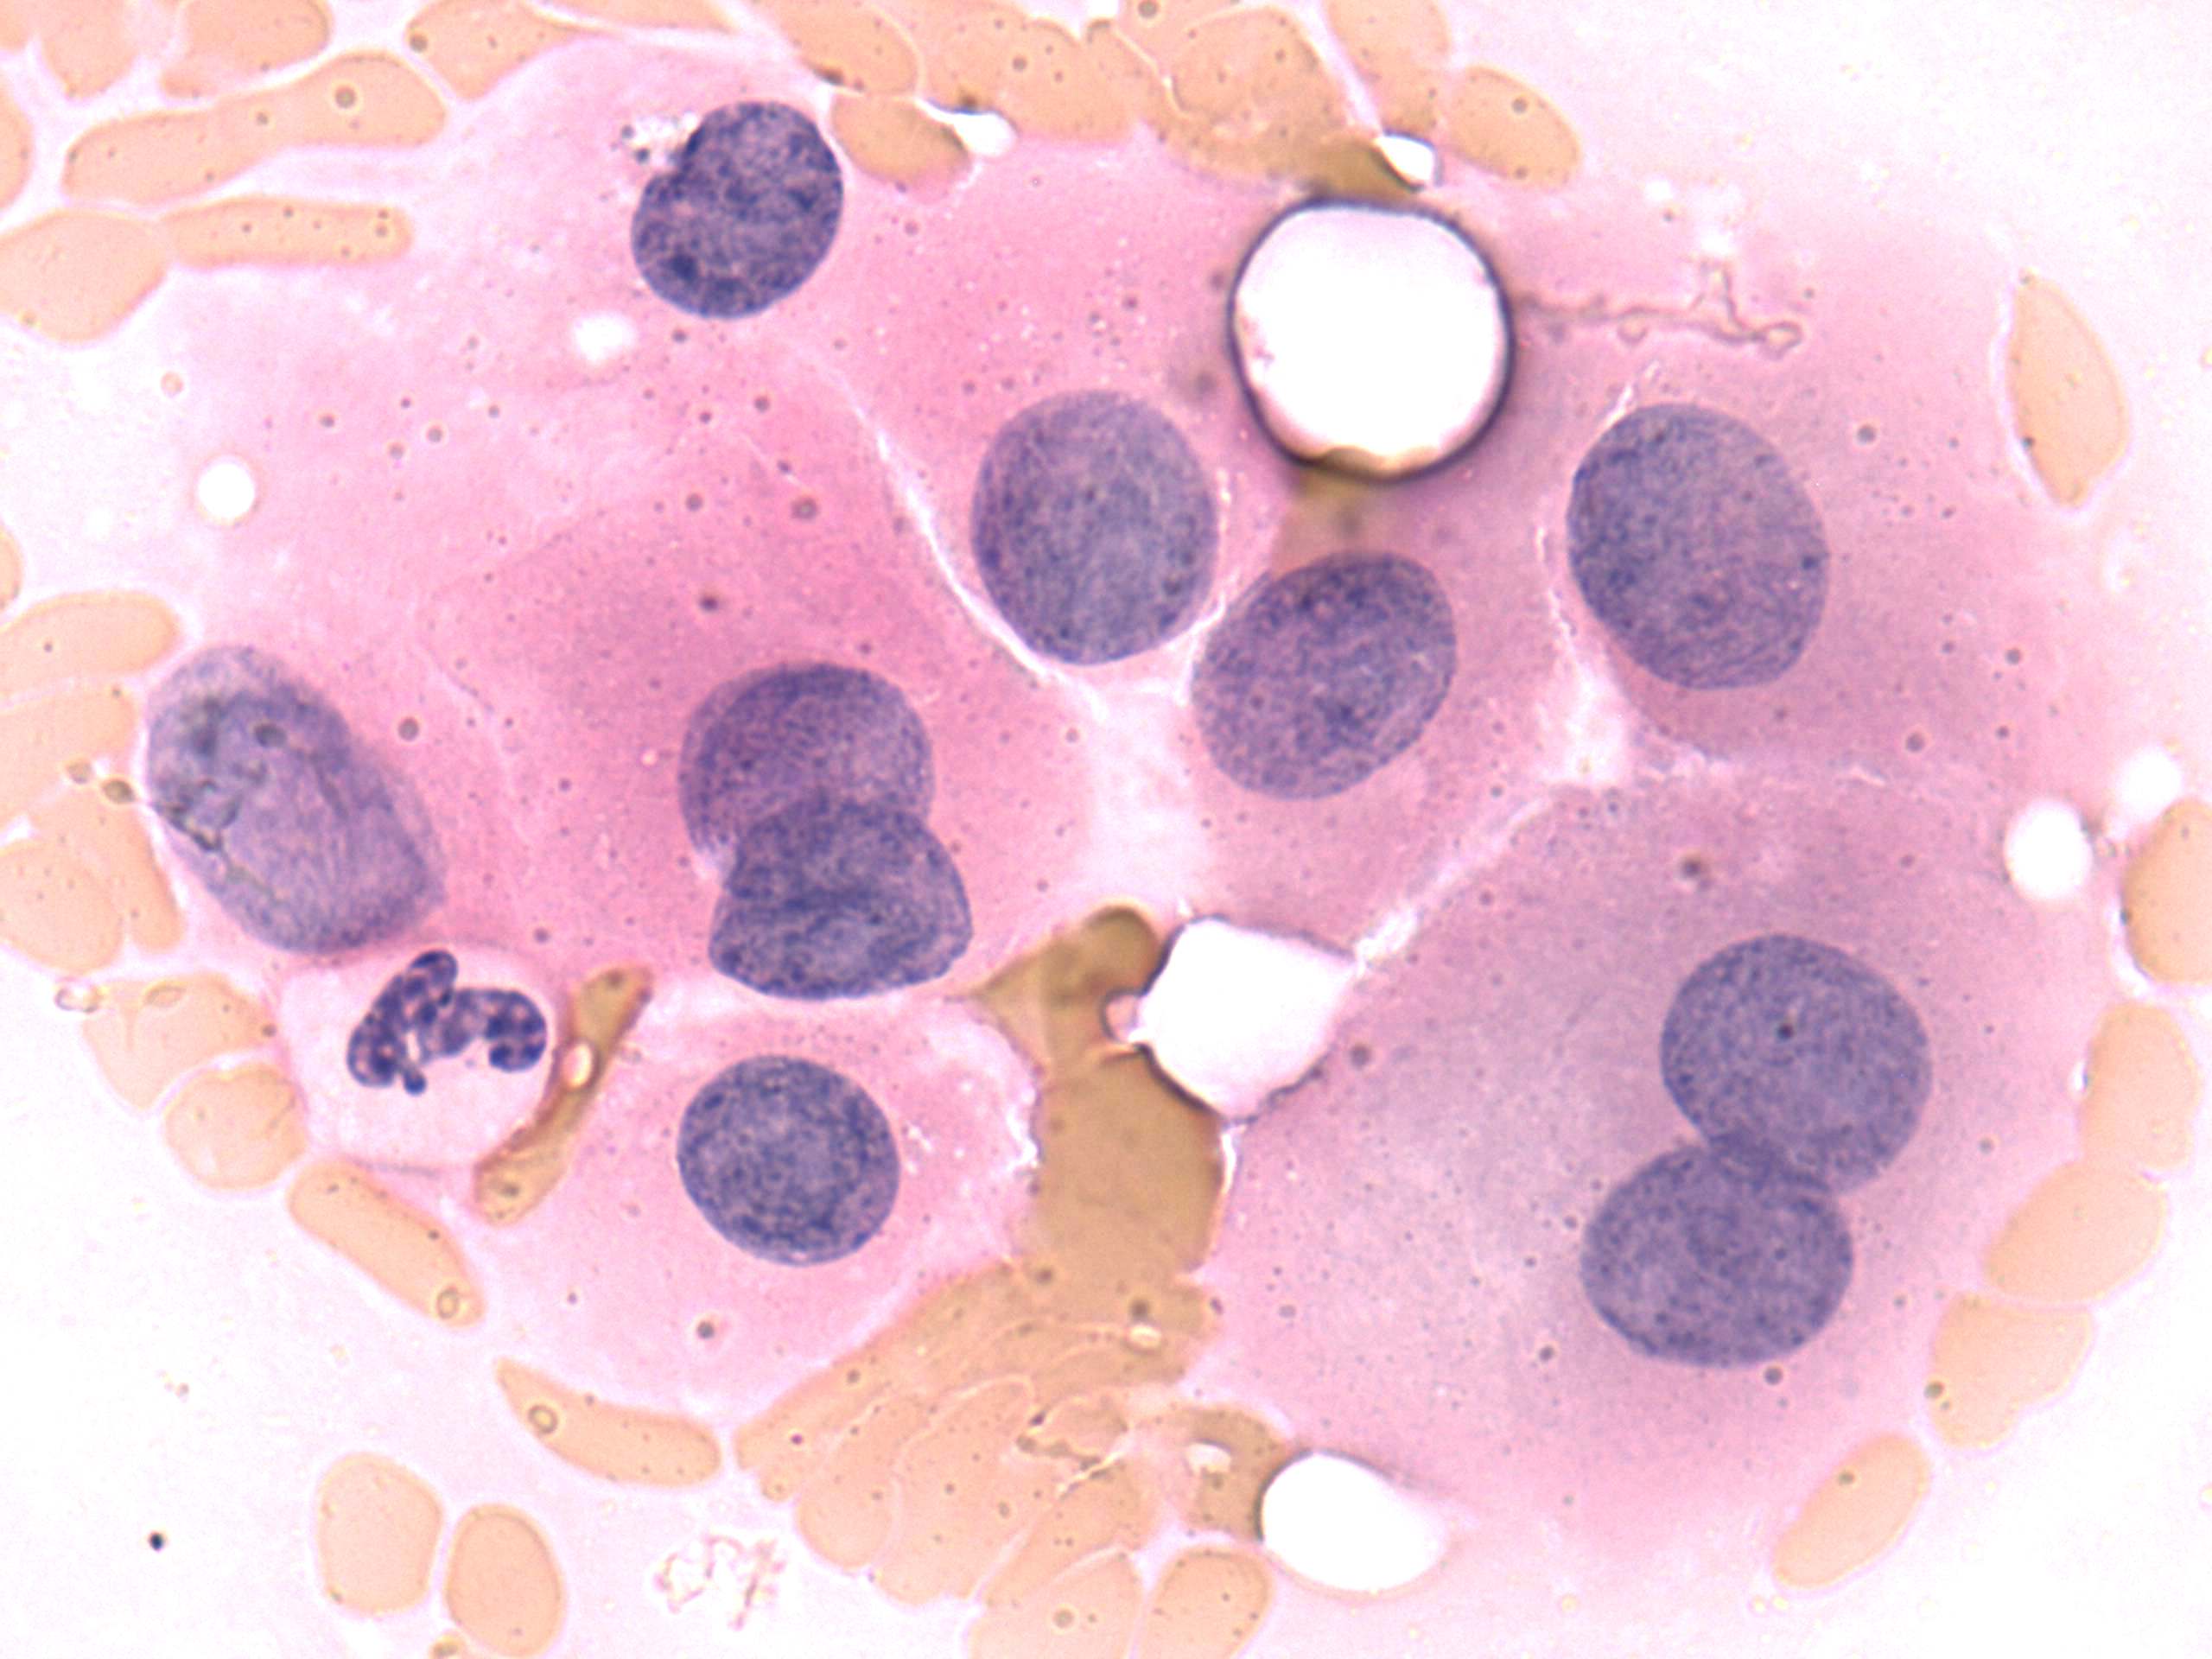 hurthle cell metaplasia Gallery